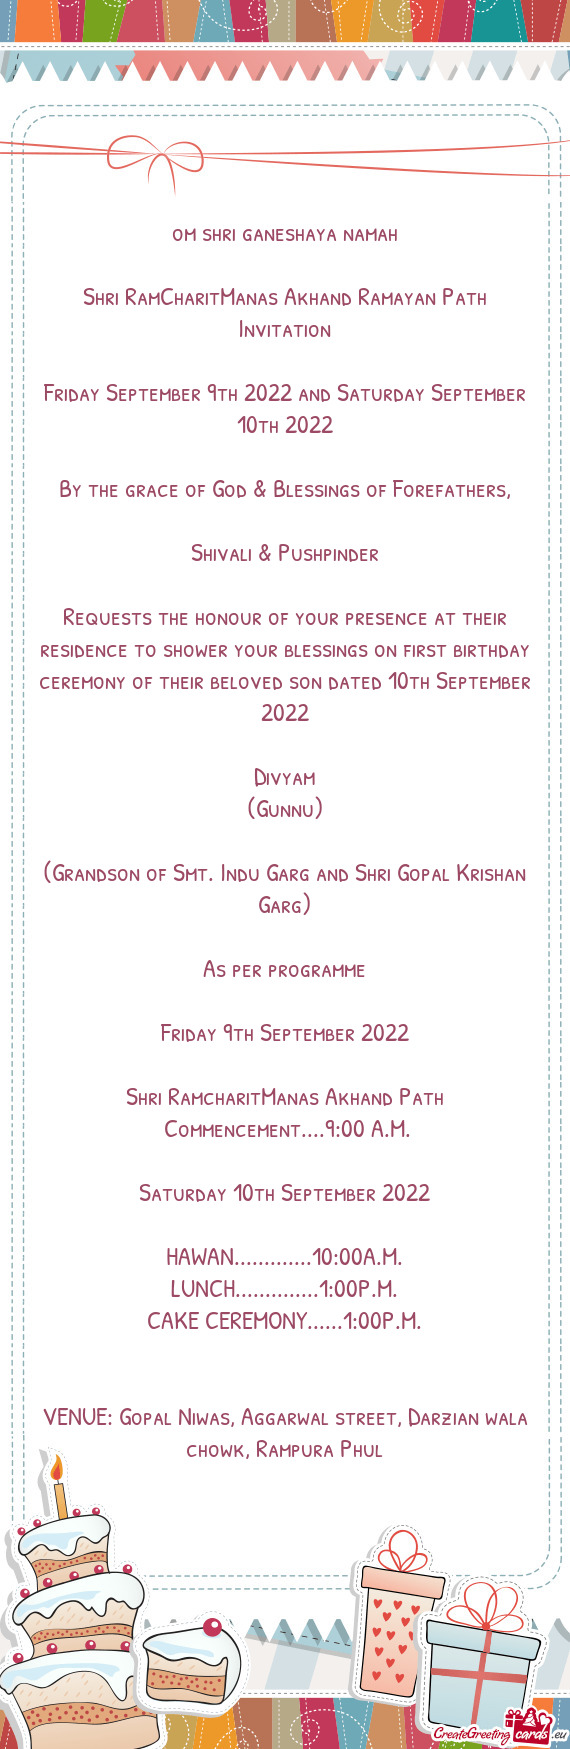 Eremony of their beloved son dated 10th September 2022